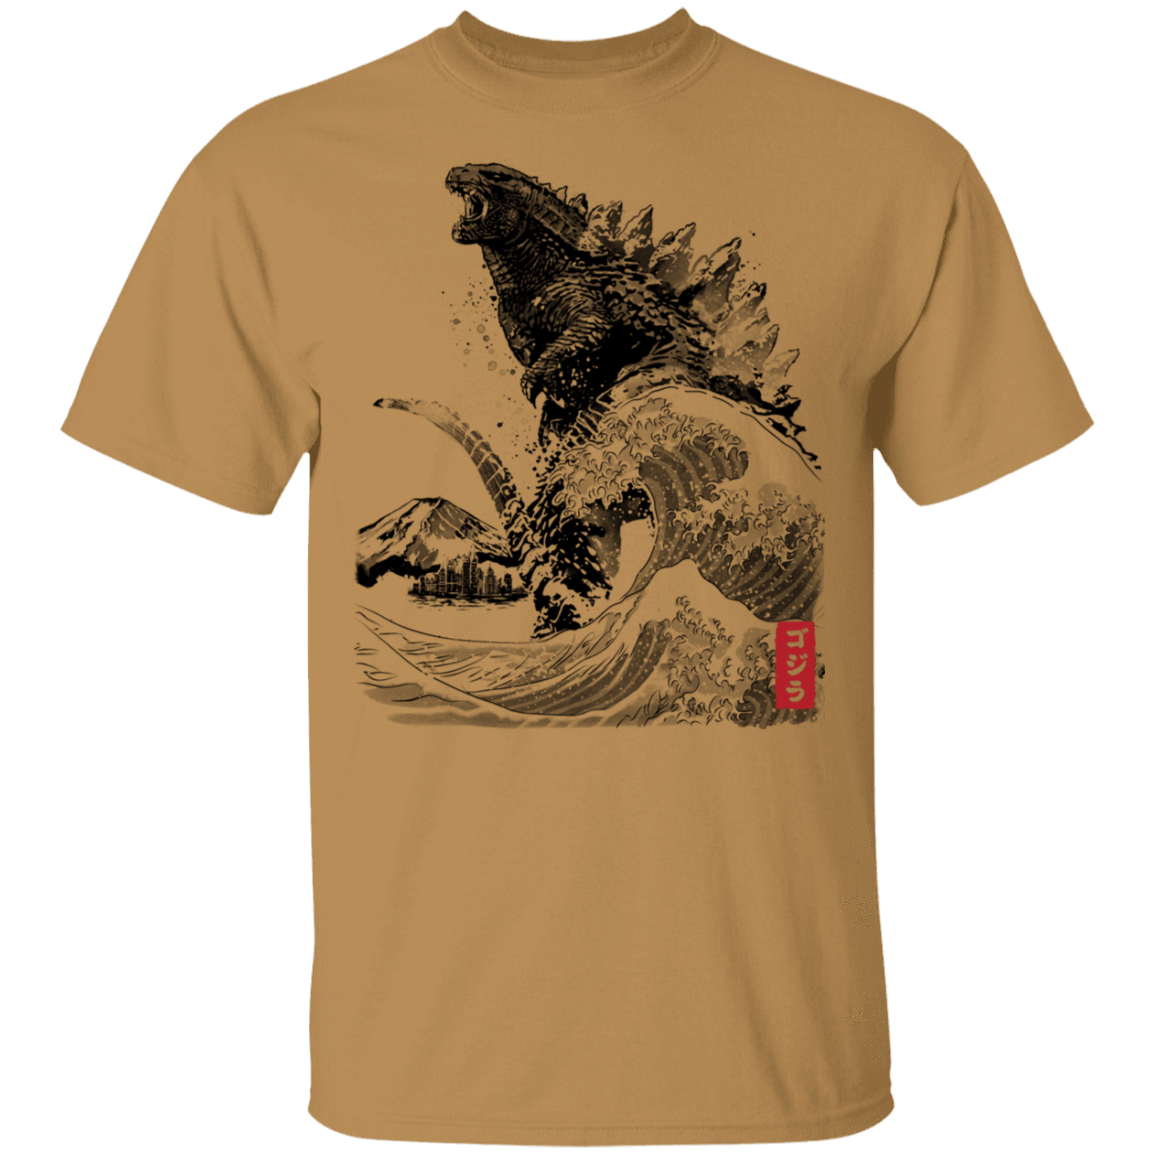 T-Shirts Old Gold / S The Rise of Gojira T-Shirt